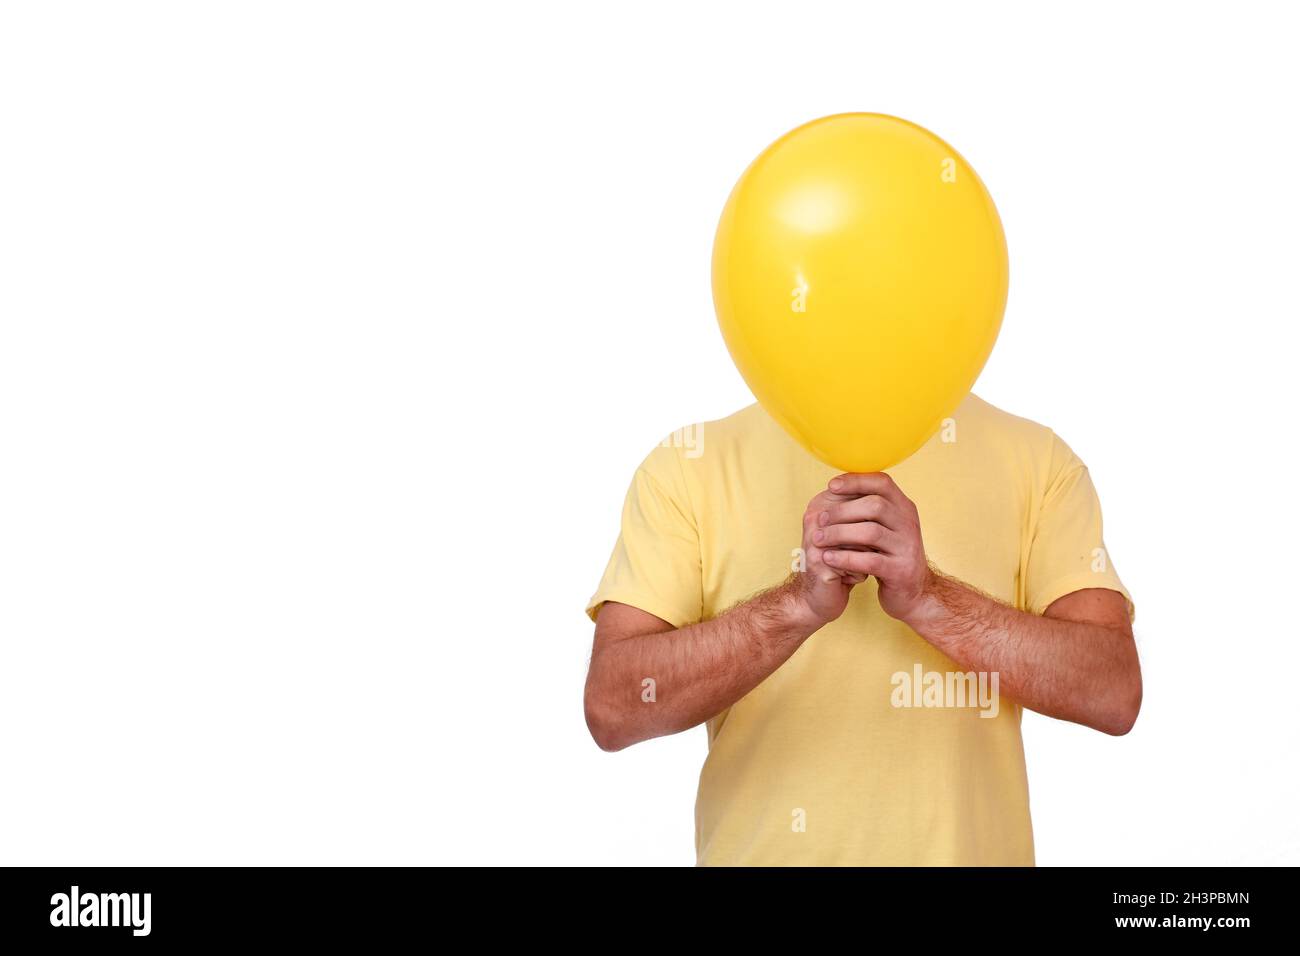 A man holds a balloon in front of him. Yellow ball covering the face. Stock Photo